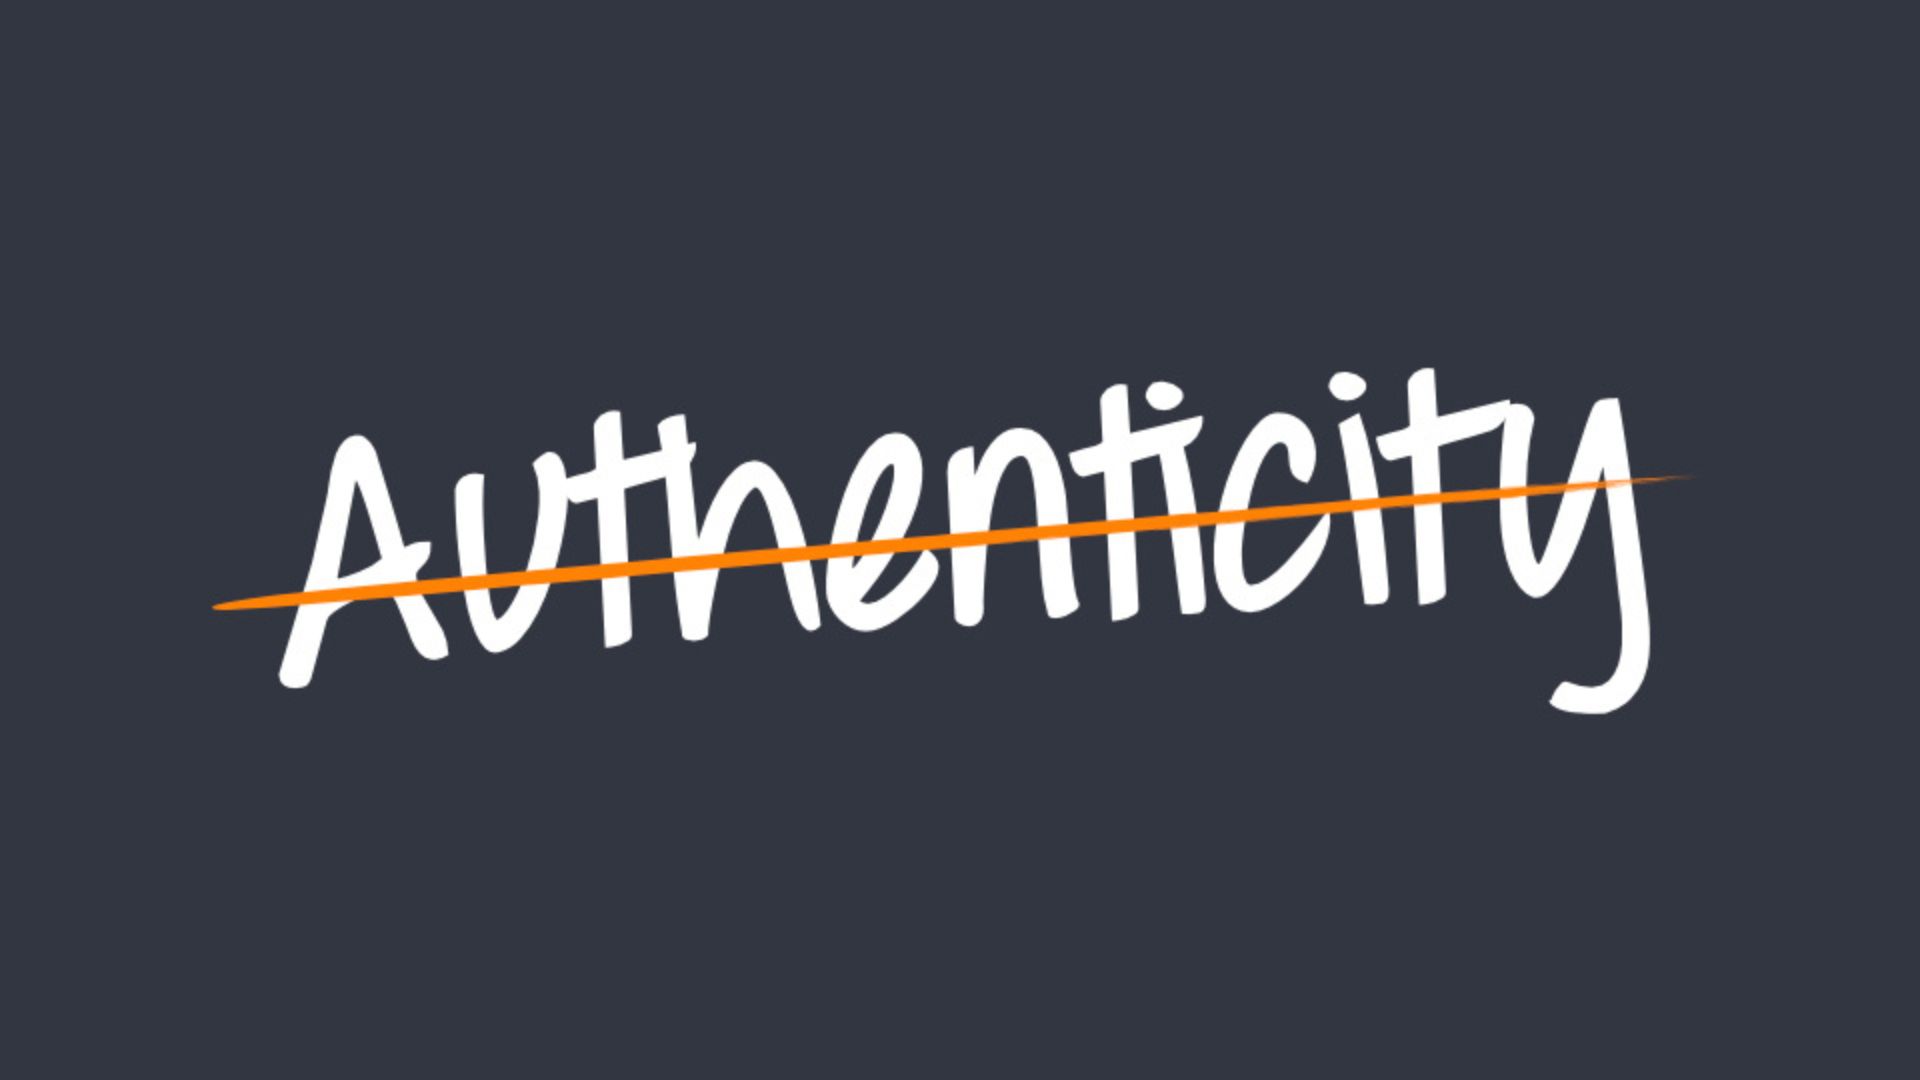 Authenticity with strikethrough